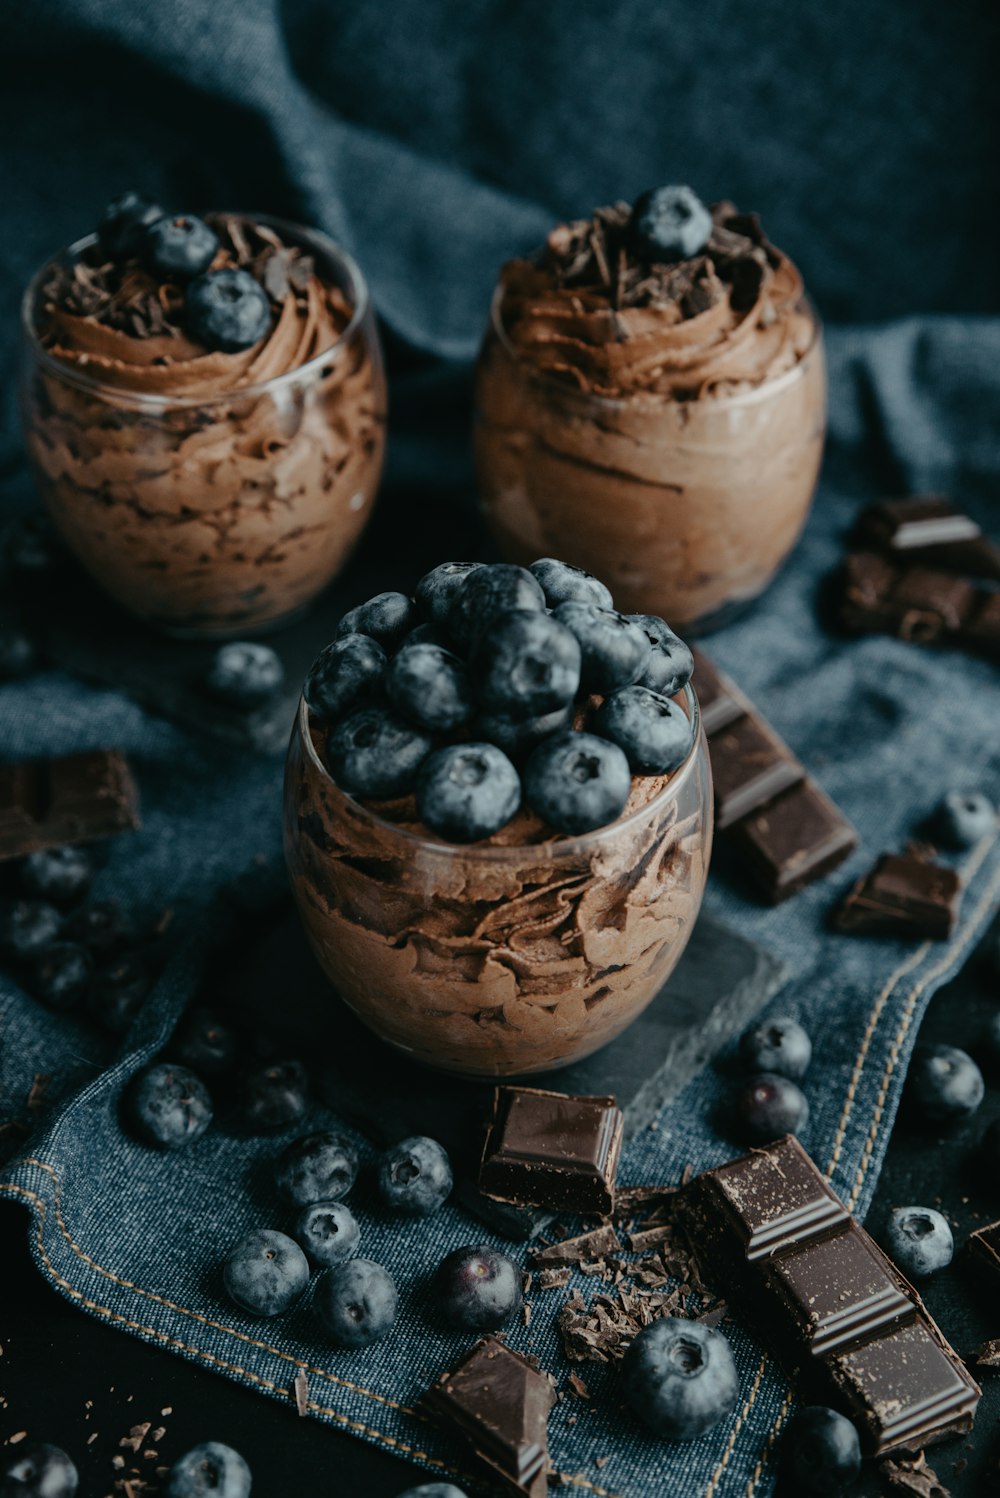 two jars of chocolate pudding with blueberries and chocolate chips